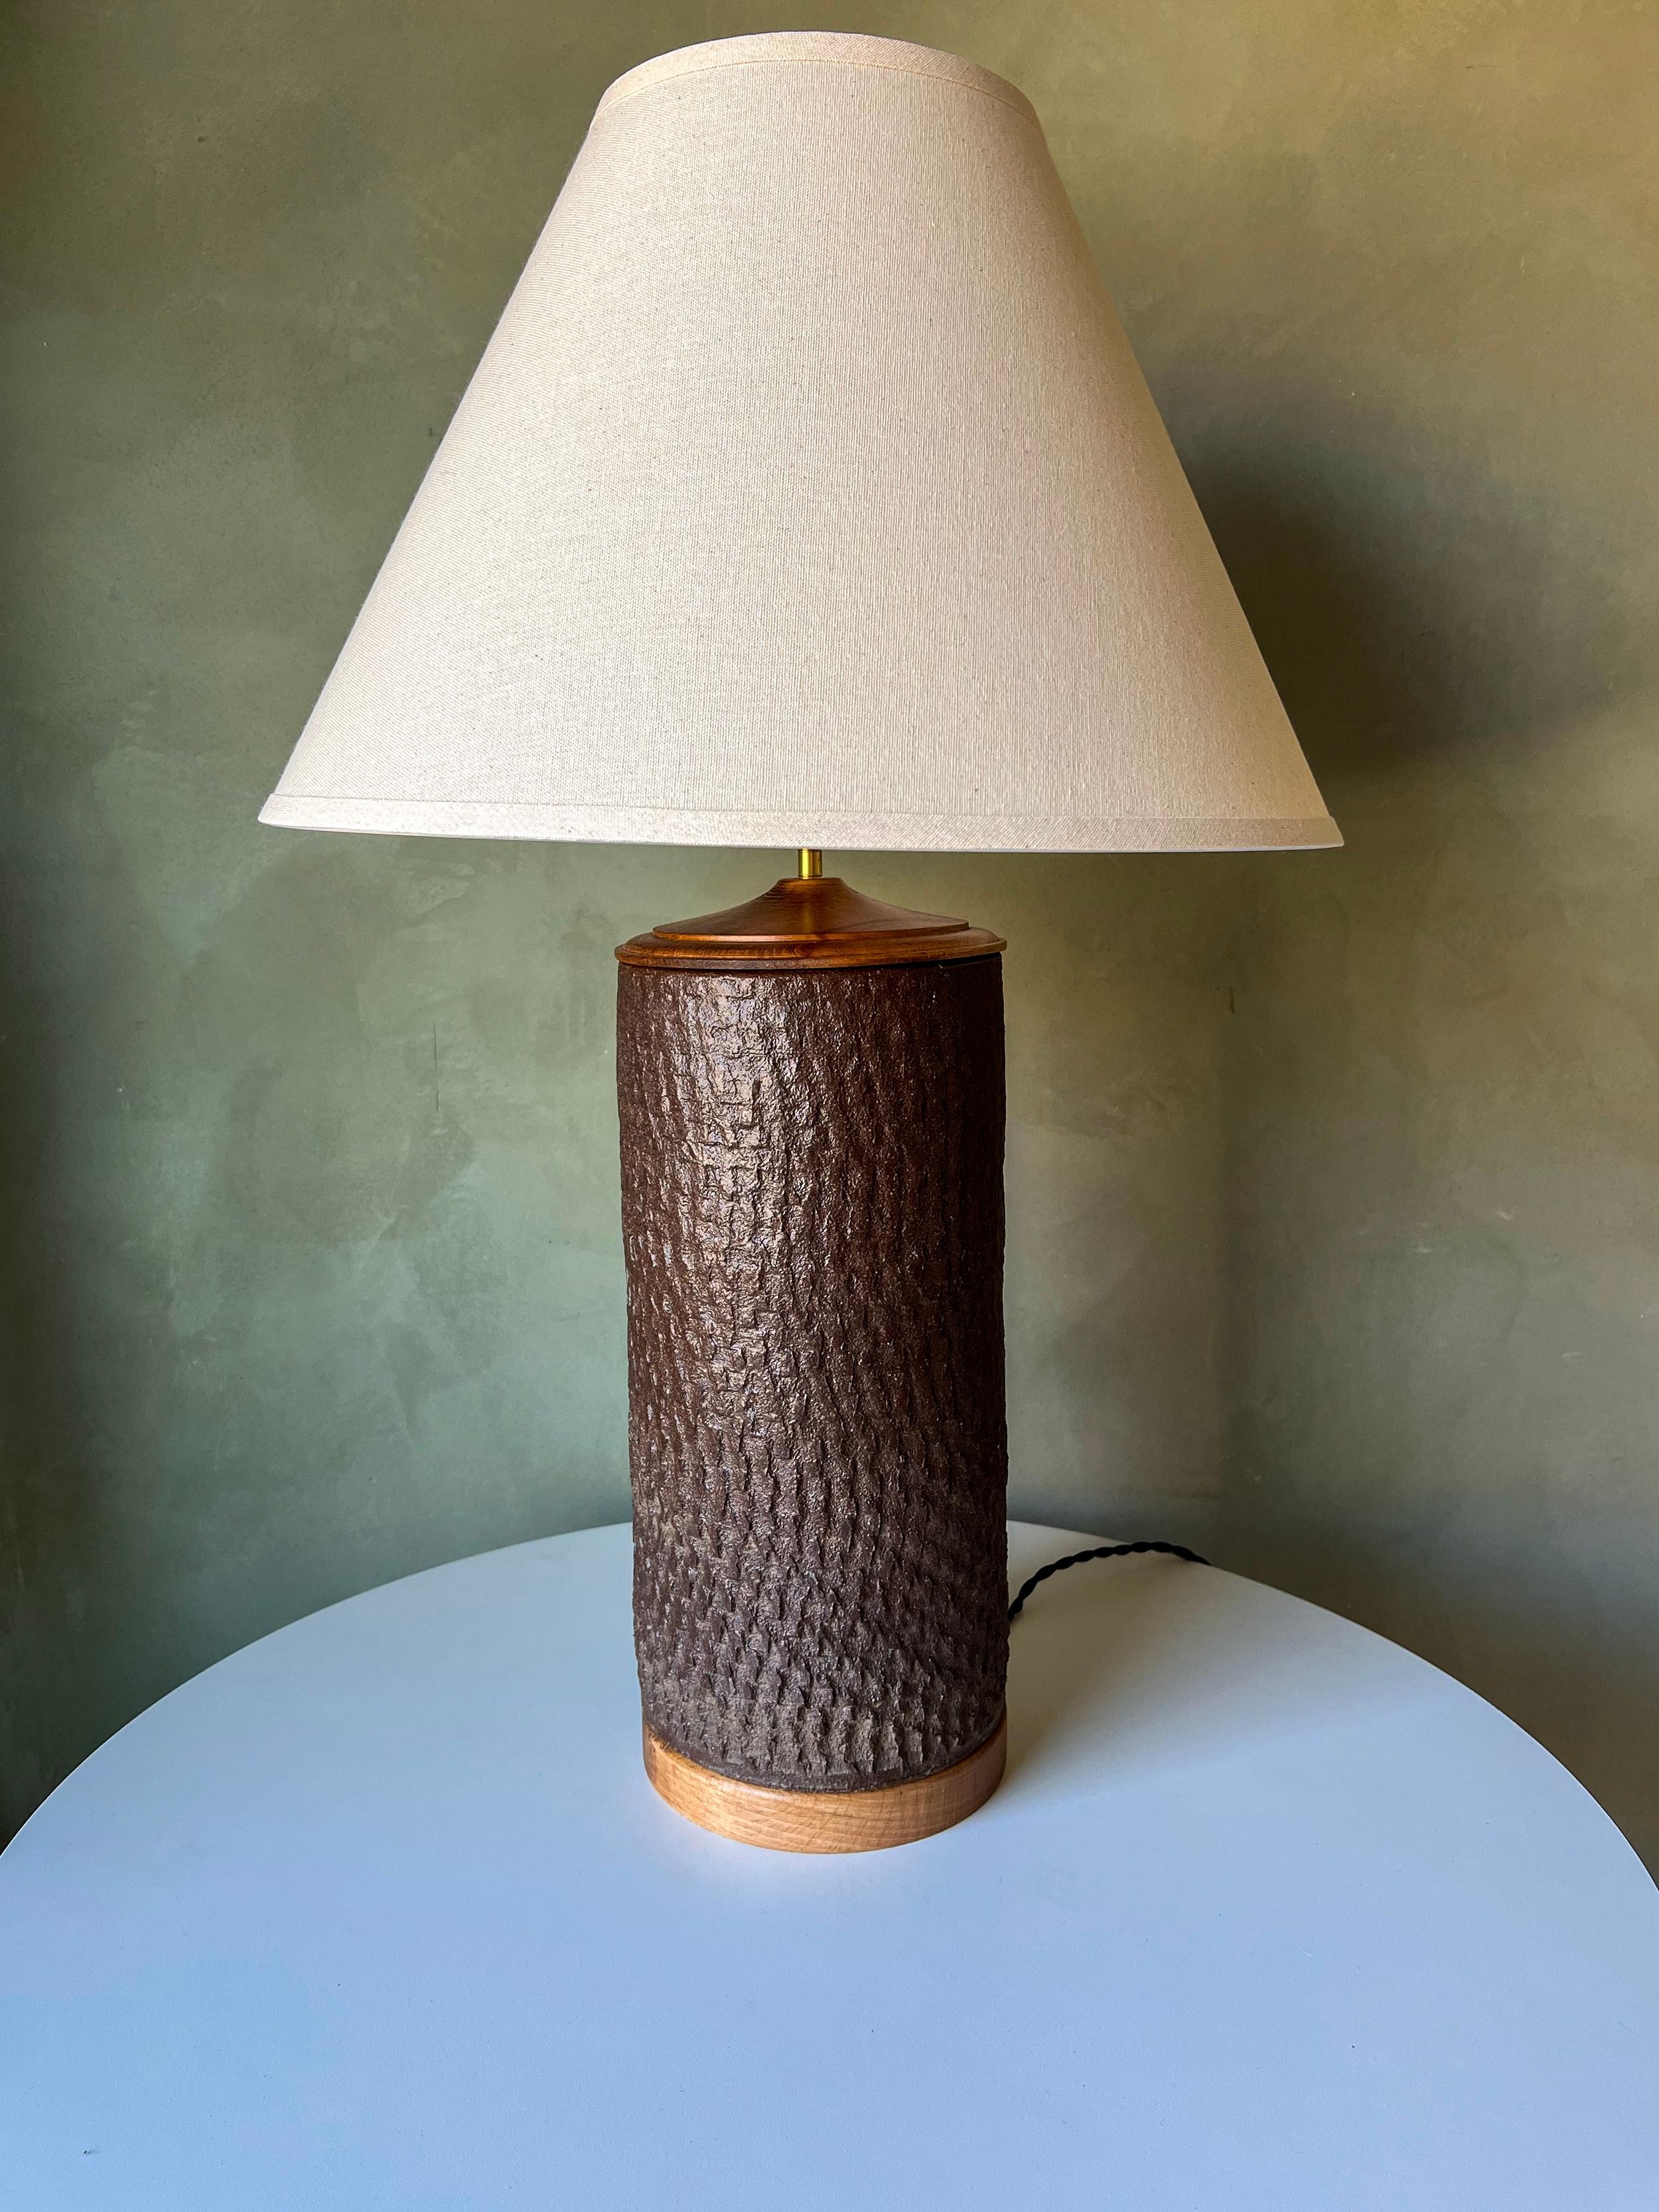 Pair of vintage ceramic table lamps by Brent Bennett. These are vintage pieces, hand-thrown by Brent Bennett. Finials and shade are new production. Ready for use. 